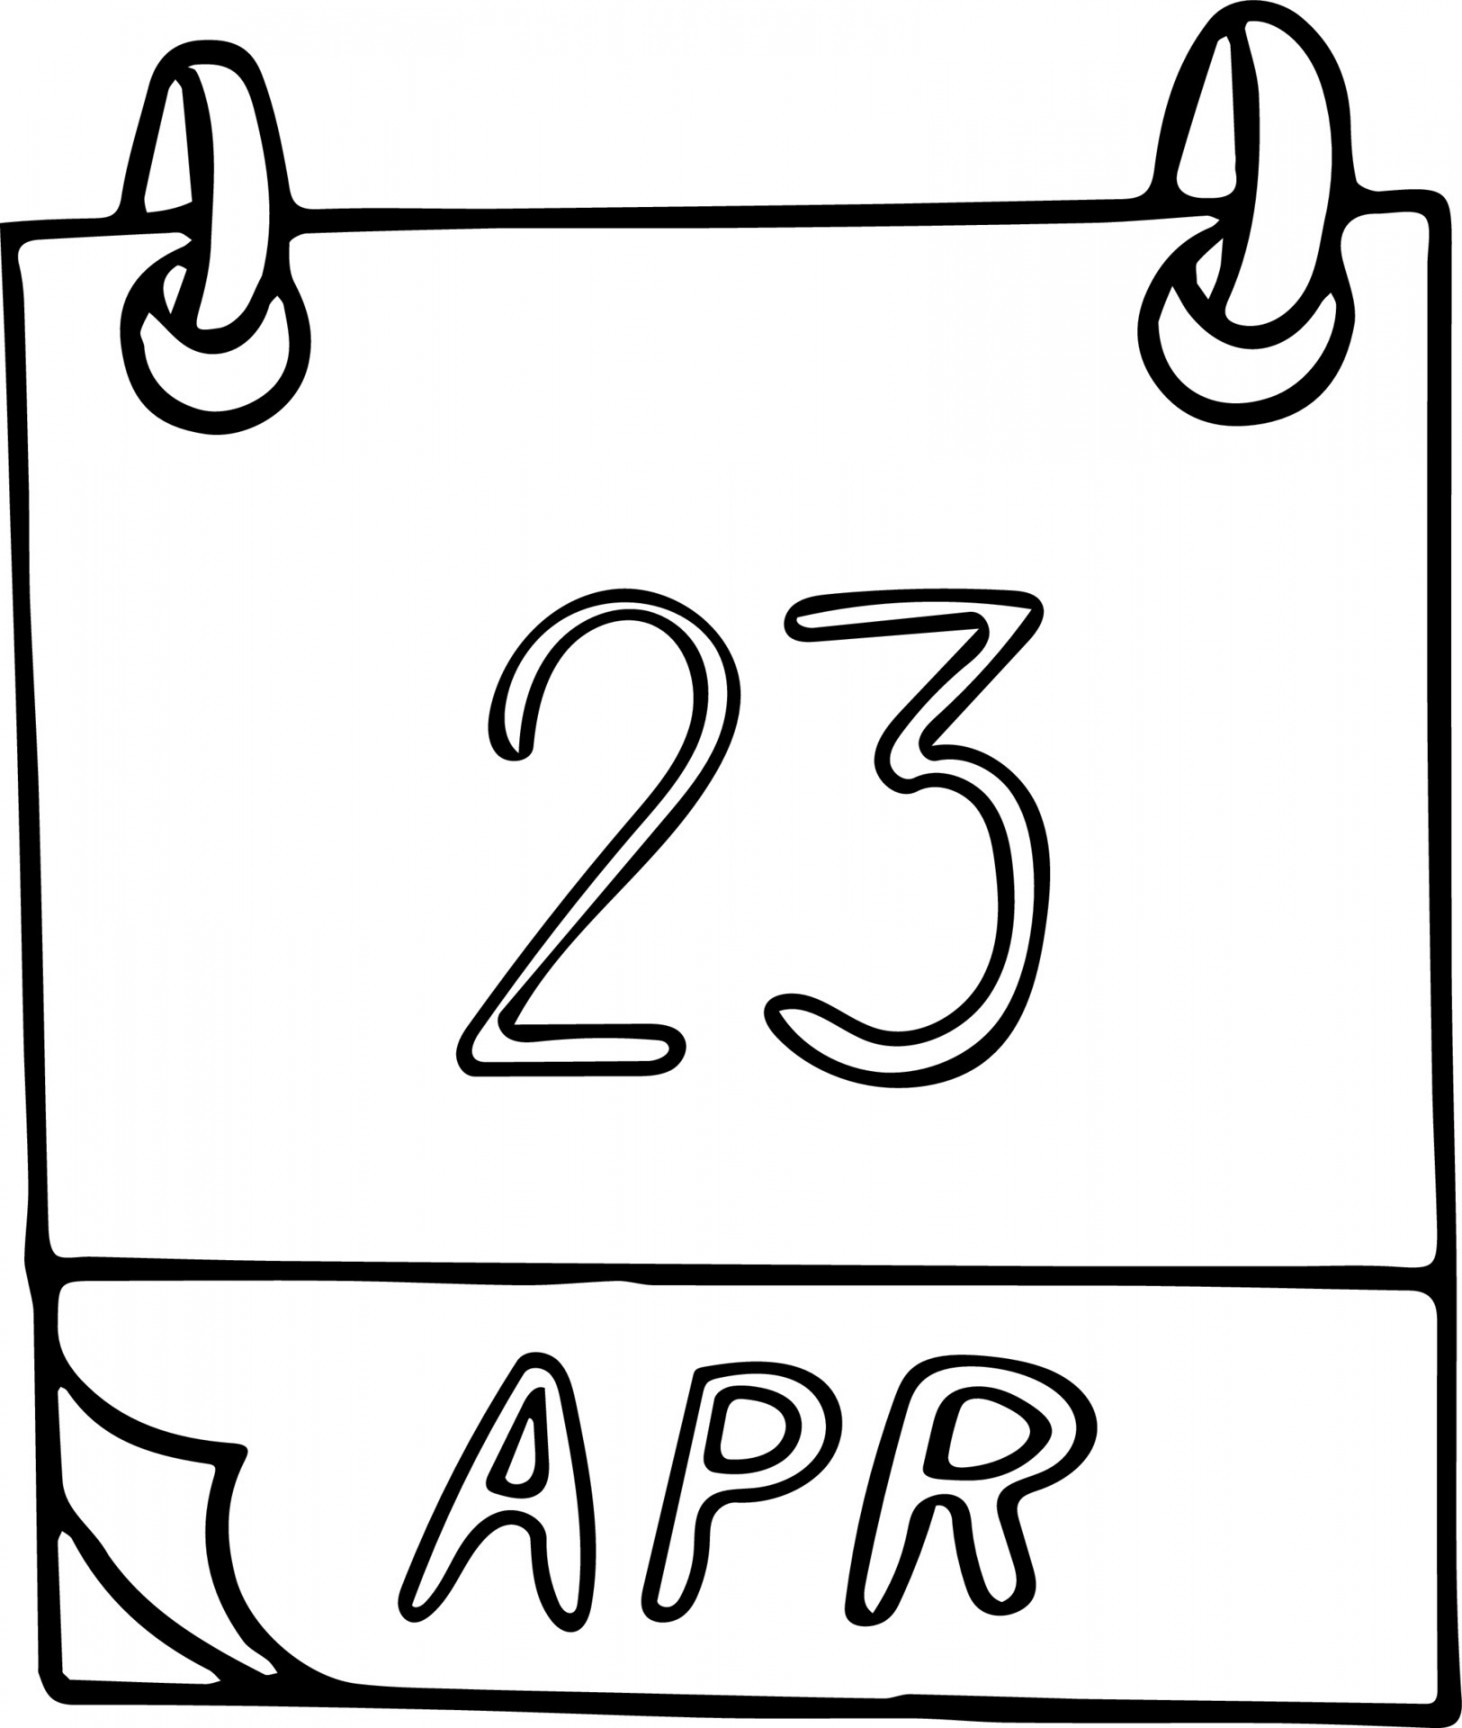 calendar hand drawn in doodle style. April